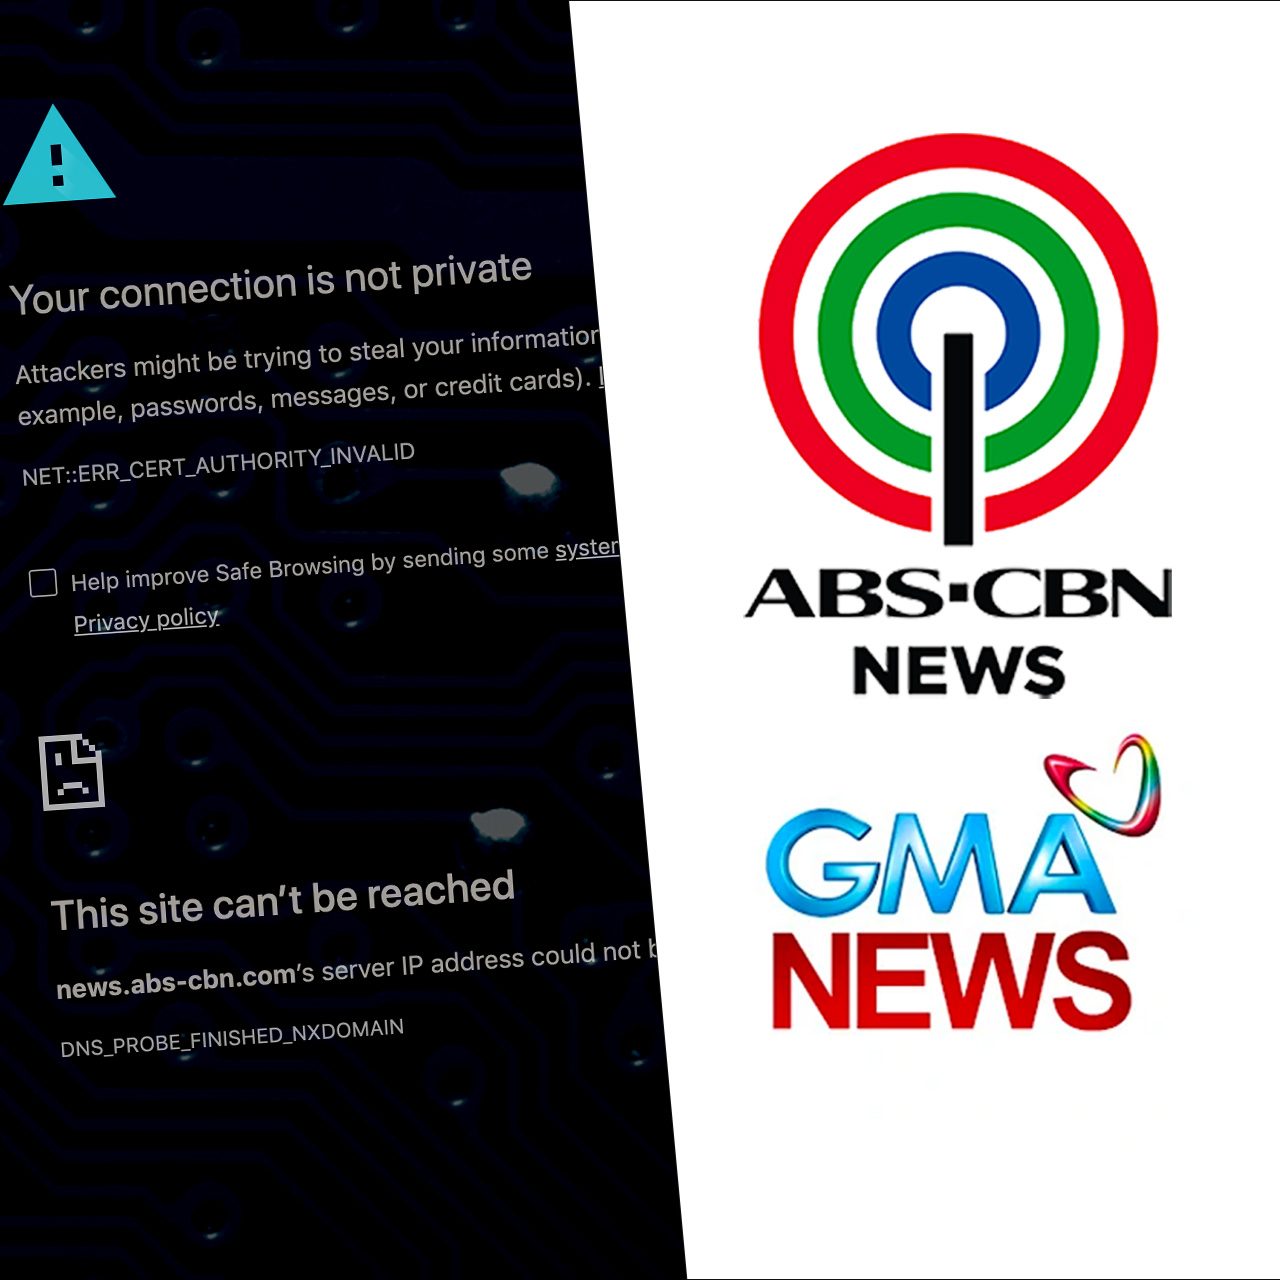 GMA, ABS-CBN inaccessible sites: What we know so far